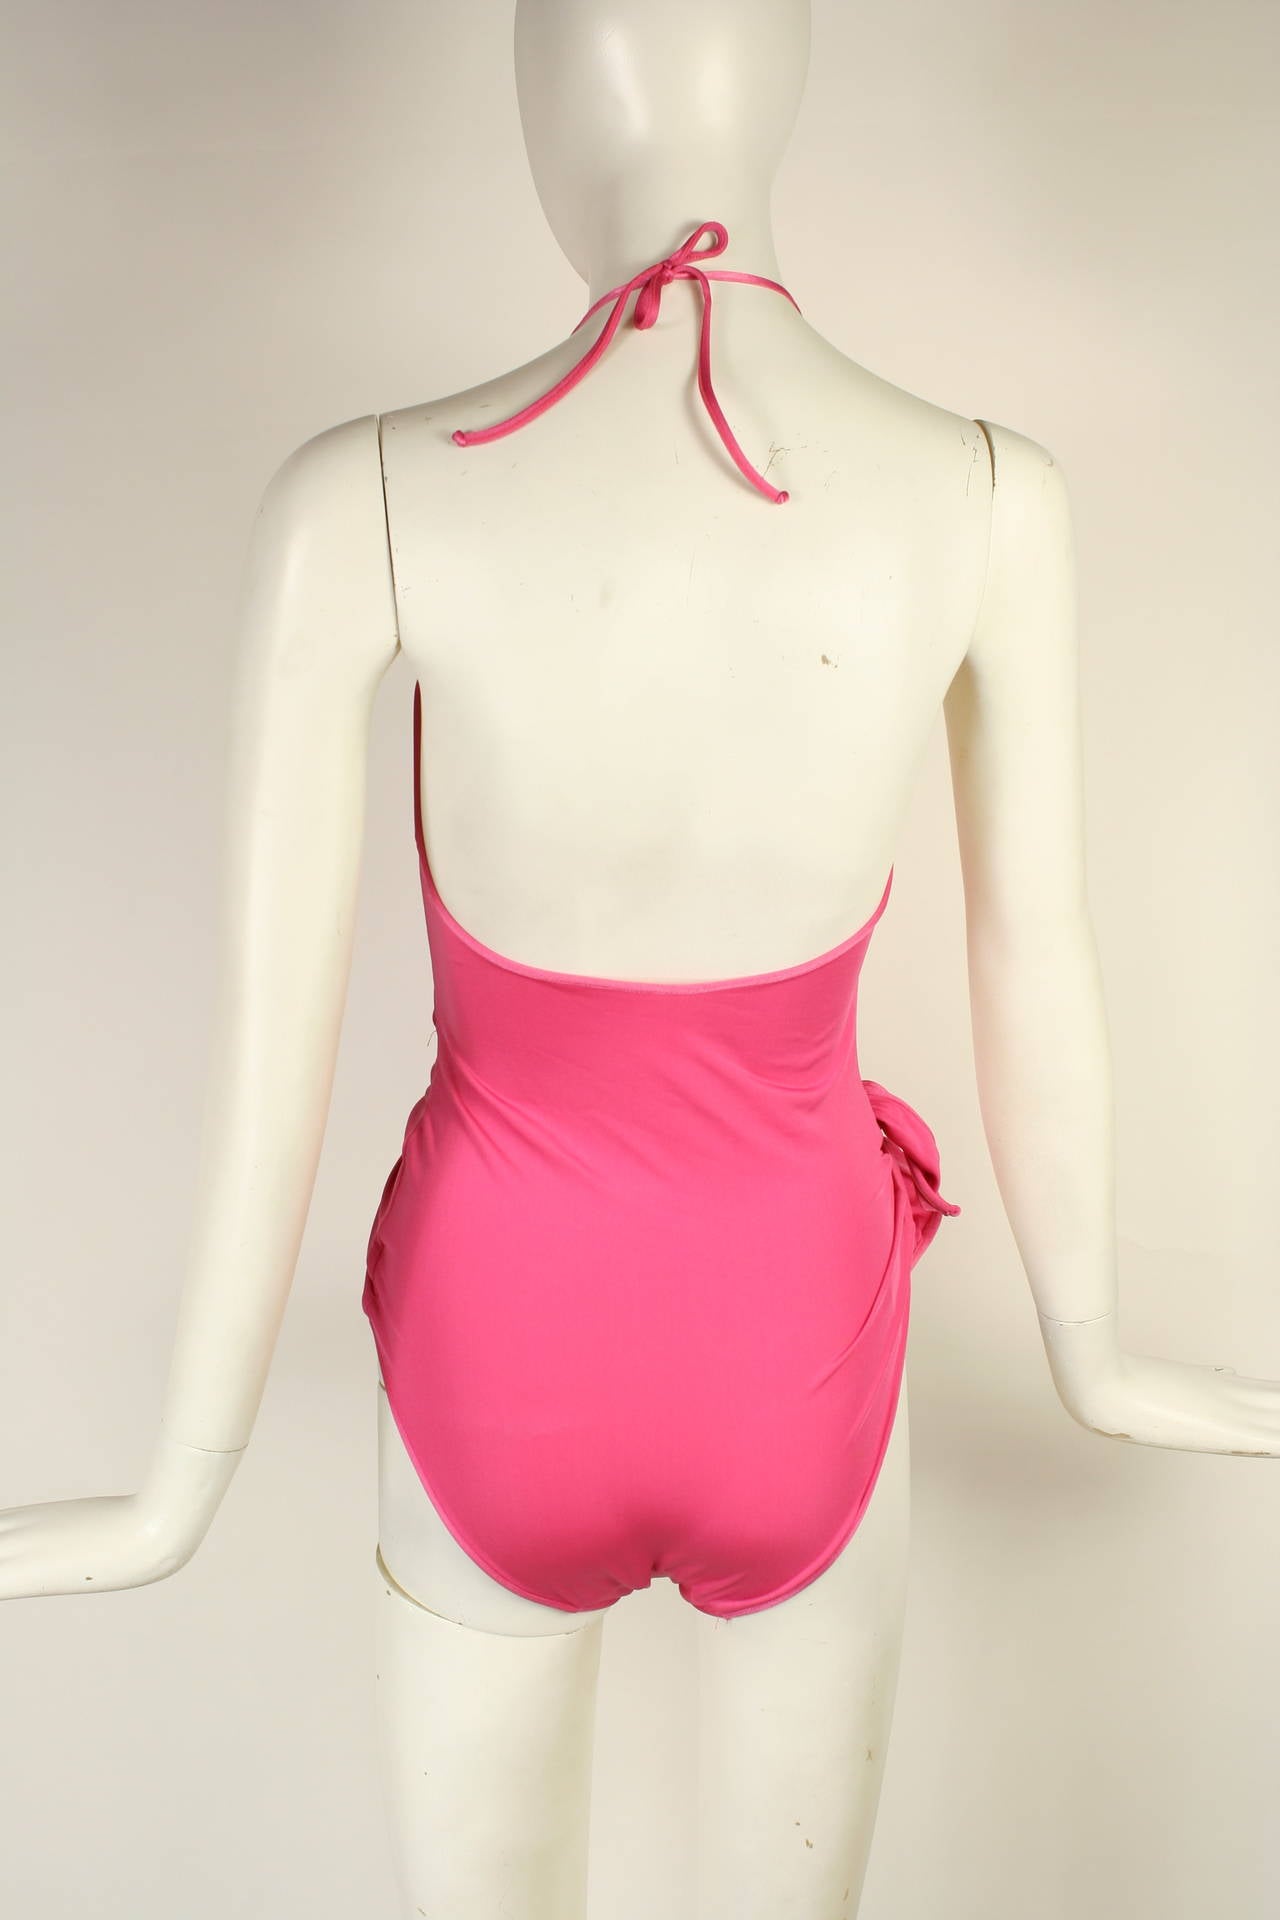 Early Gianni Versace 1970s Pink Wrap Bathing Suit New with Tags For Sale 1